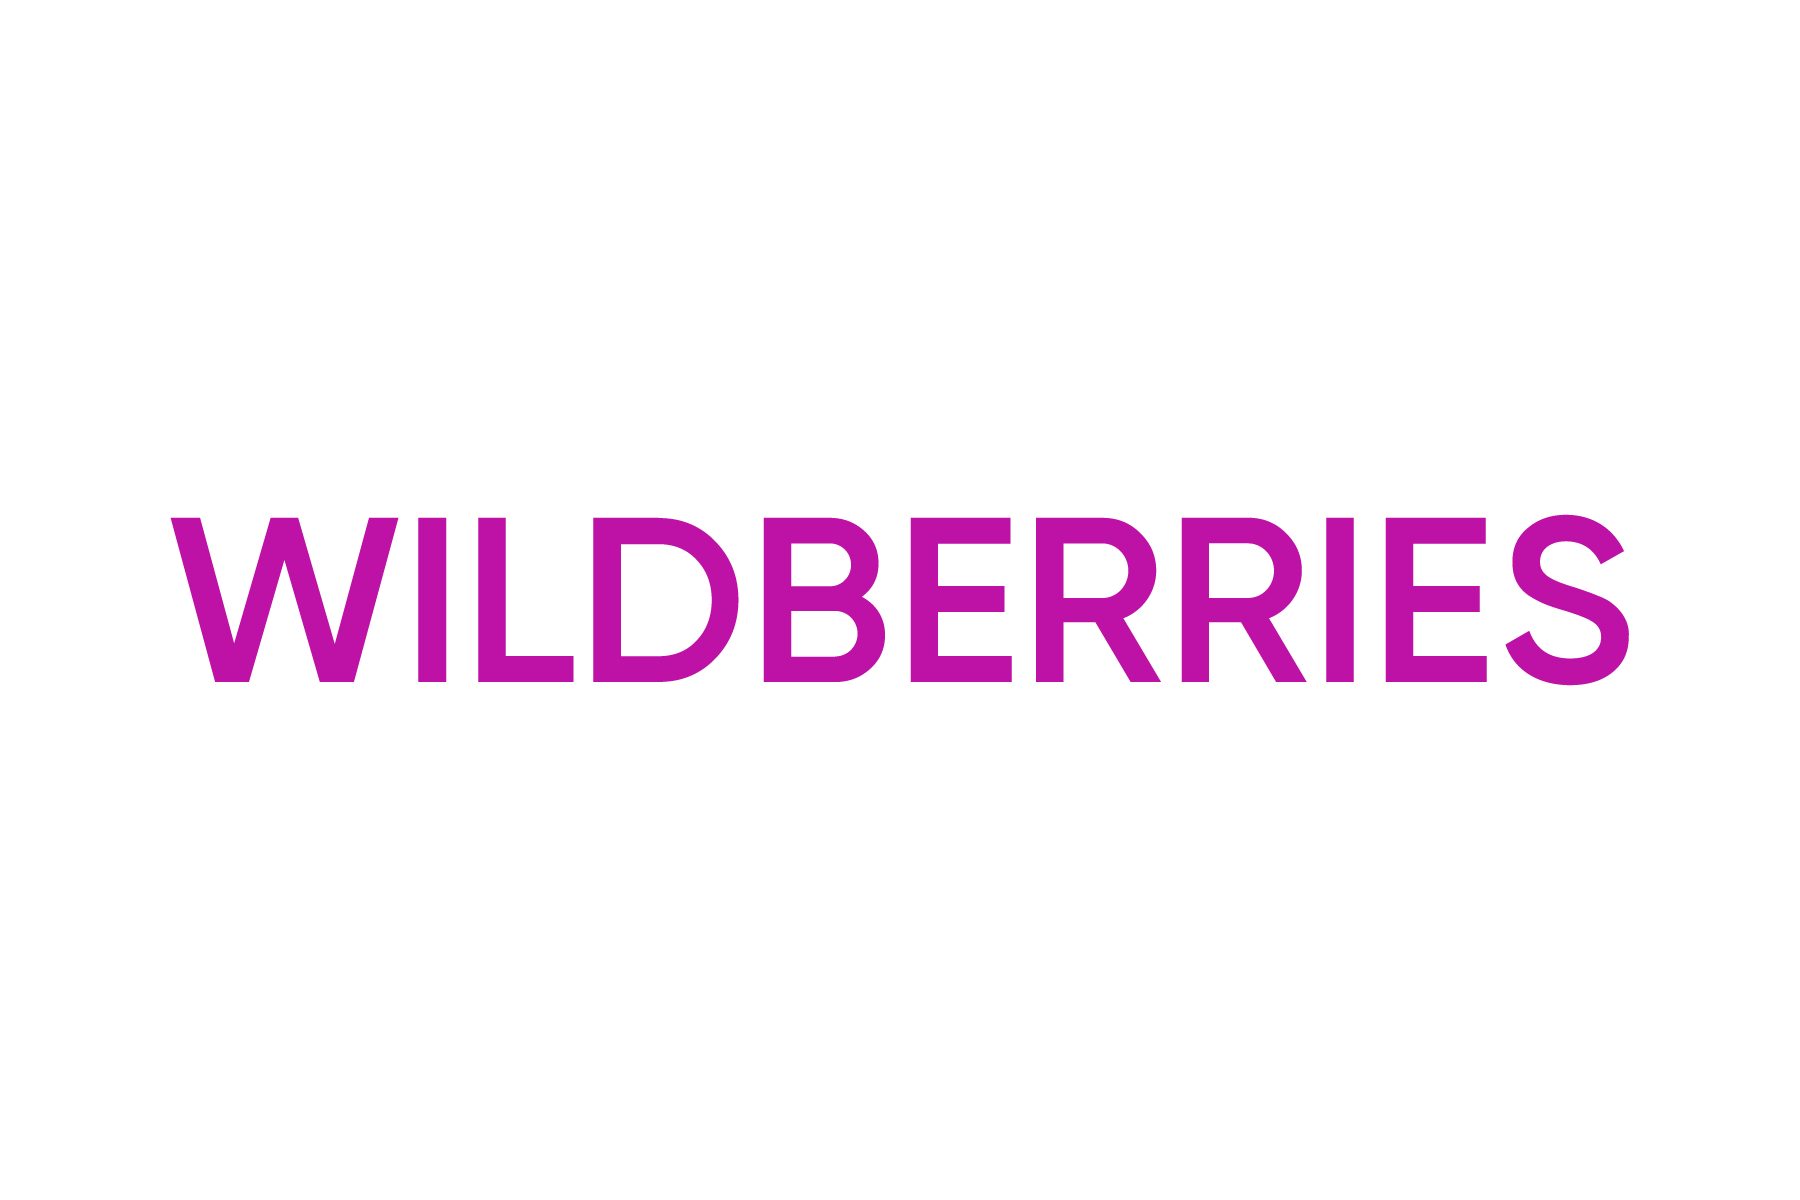 Russian E-Commerce Giant Wildberries Expands to Baltics